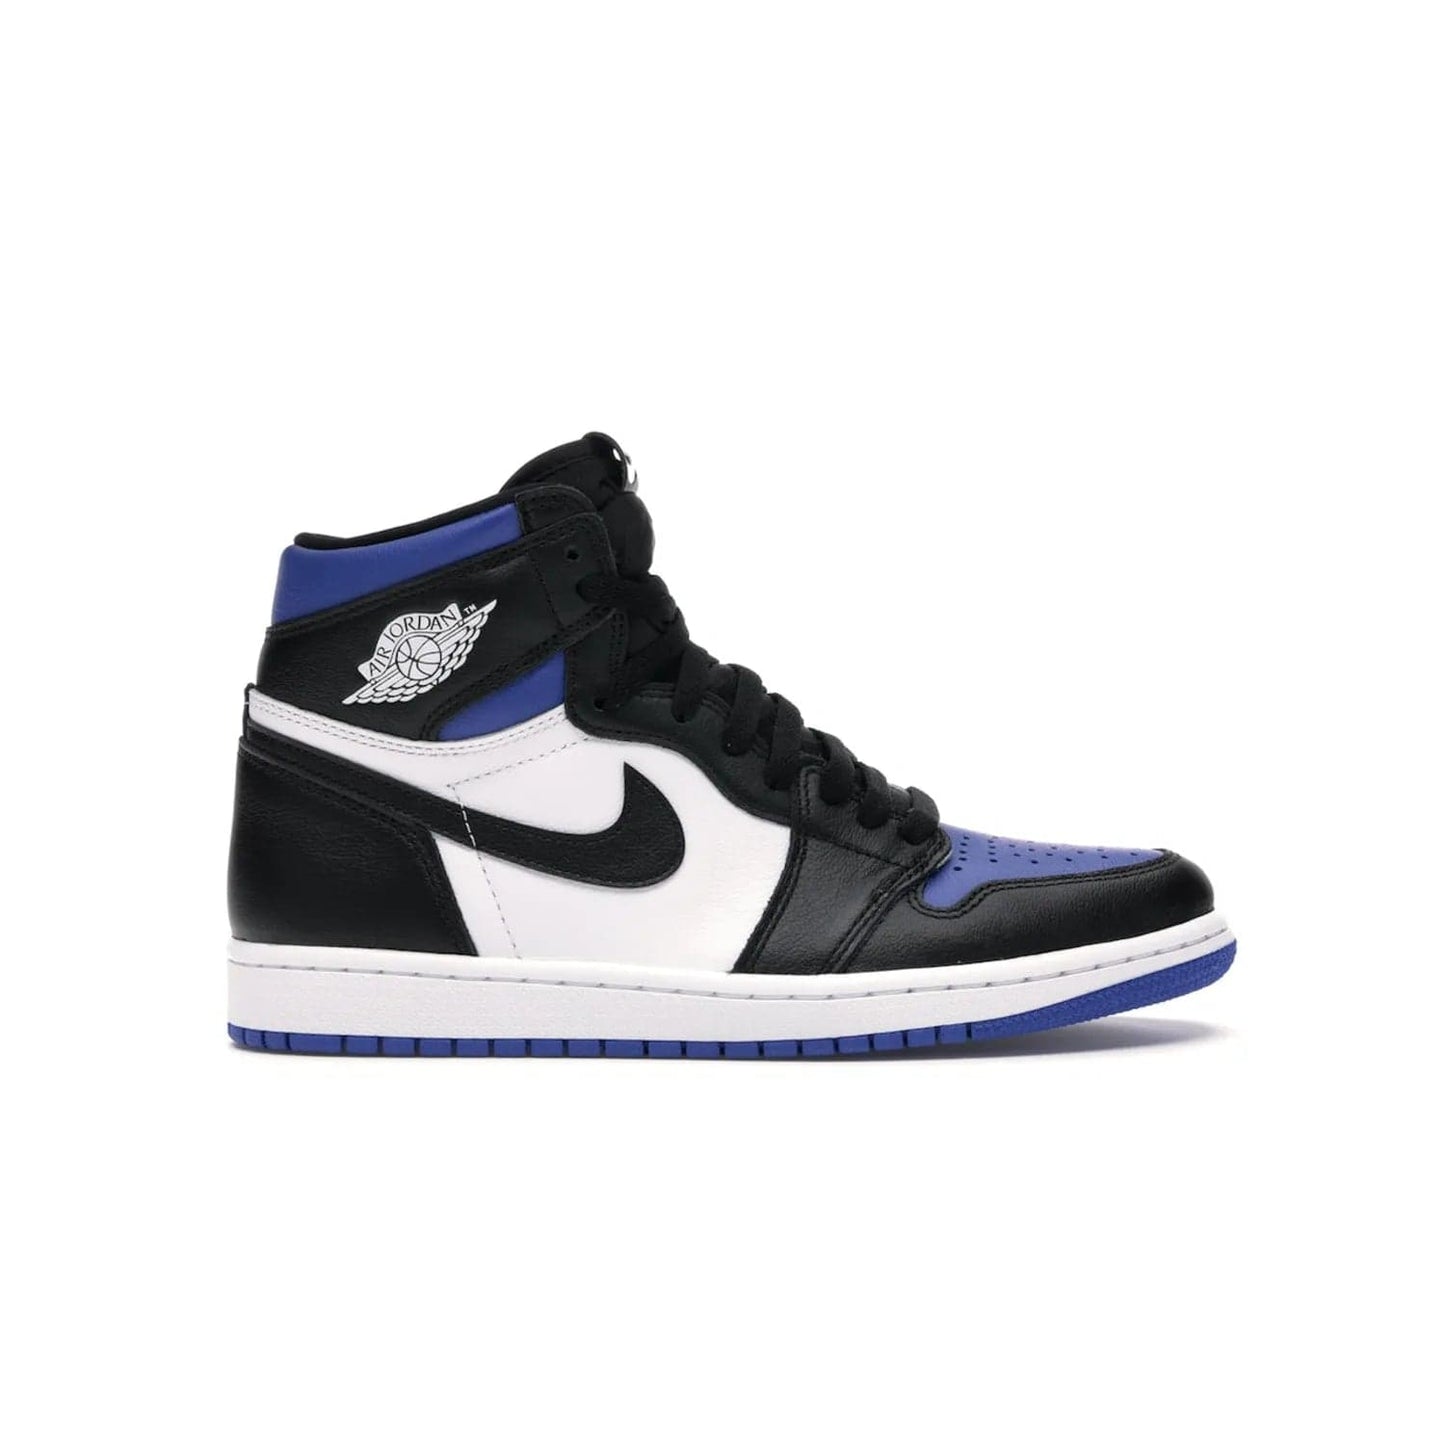 Jordan 1 Retro High Royal Toe - Image 1 - Only at www.BallersClubKickz.com - Refresh your look with the Jordan 1 Retro High Royal Toe. This classic AJ 1 sports a white and royal leather upper, black leather overlays, and branded leather tongue tag. Pick up today and set the streets ablaze.